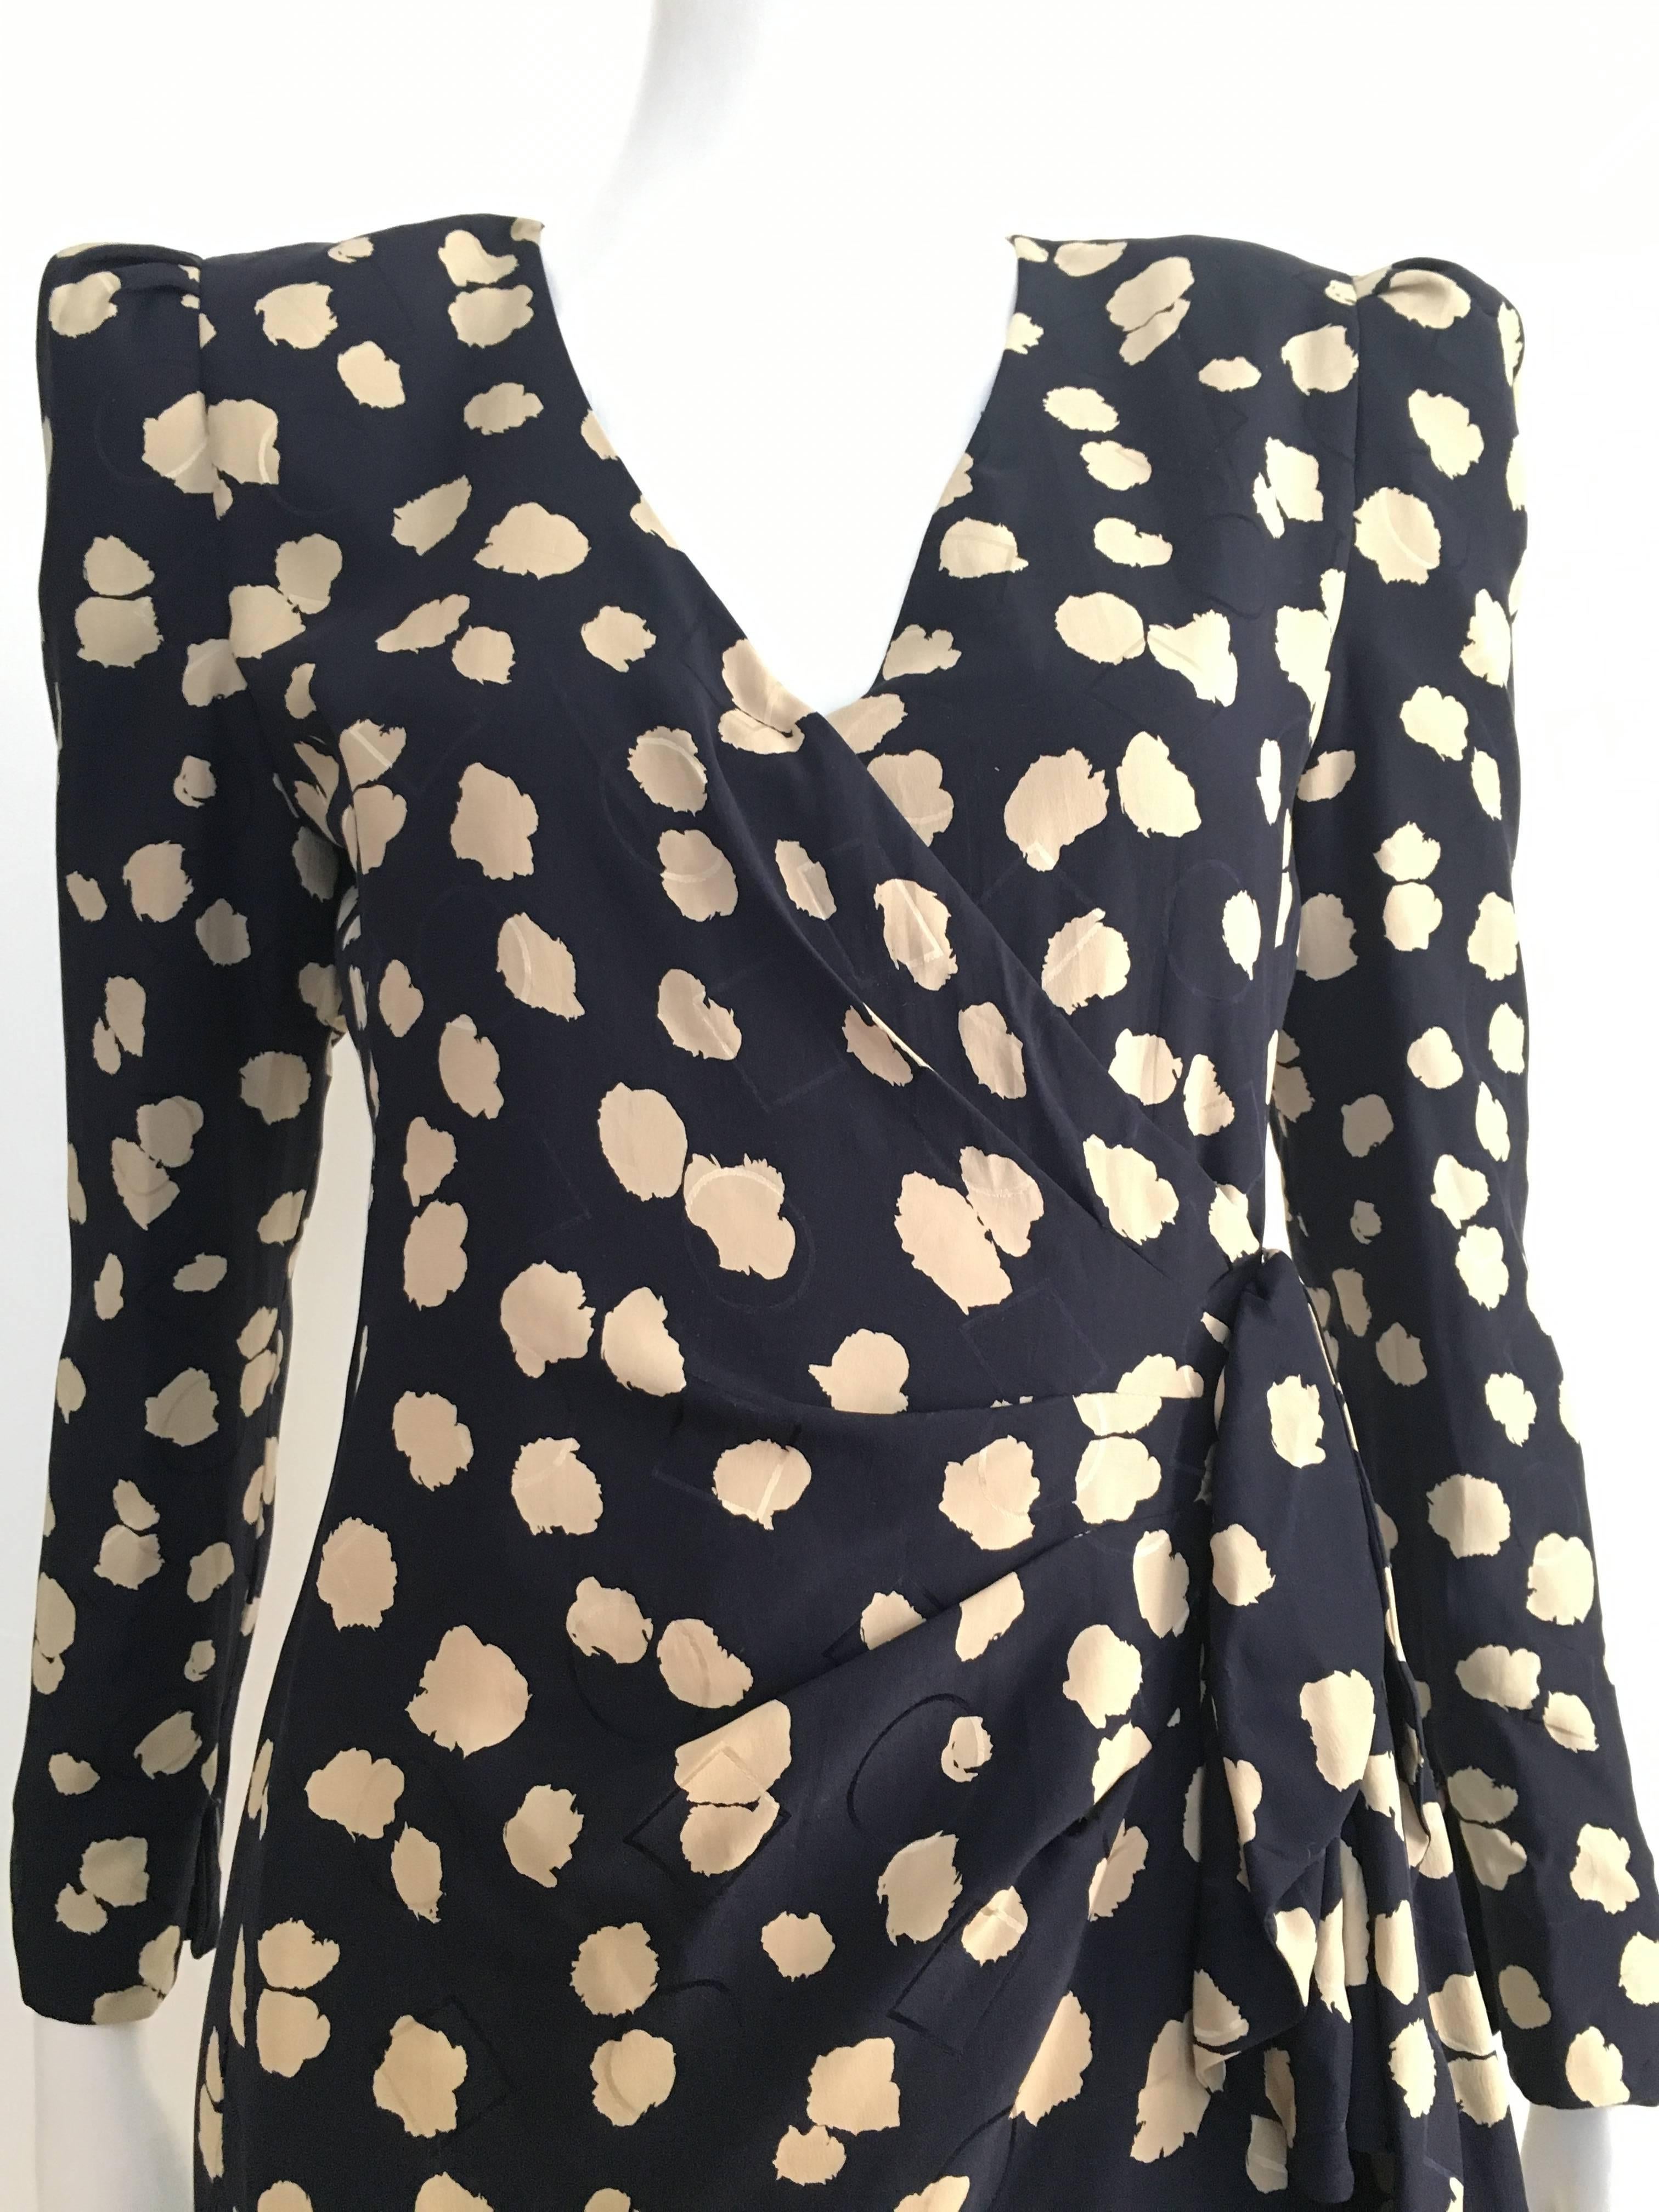 Carolina Herrera for Neiman Marcus 1990s navy silk cloud pattern faux wrap dress is a size 8.  Ladies please use your measuring tape so you can properly measure your bust, waist & hips to make certain this lovely vintage piece will fit you to